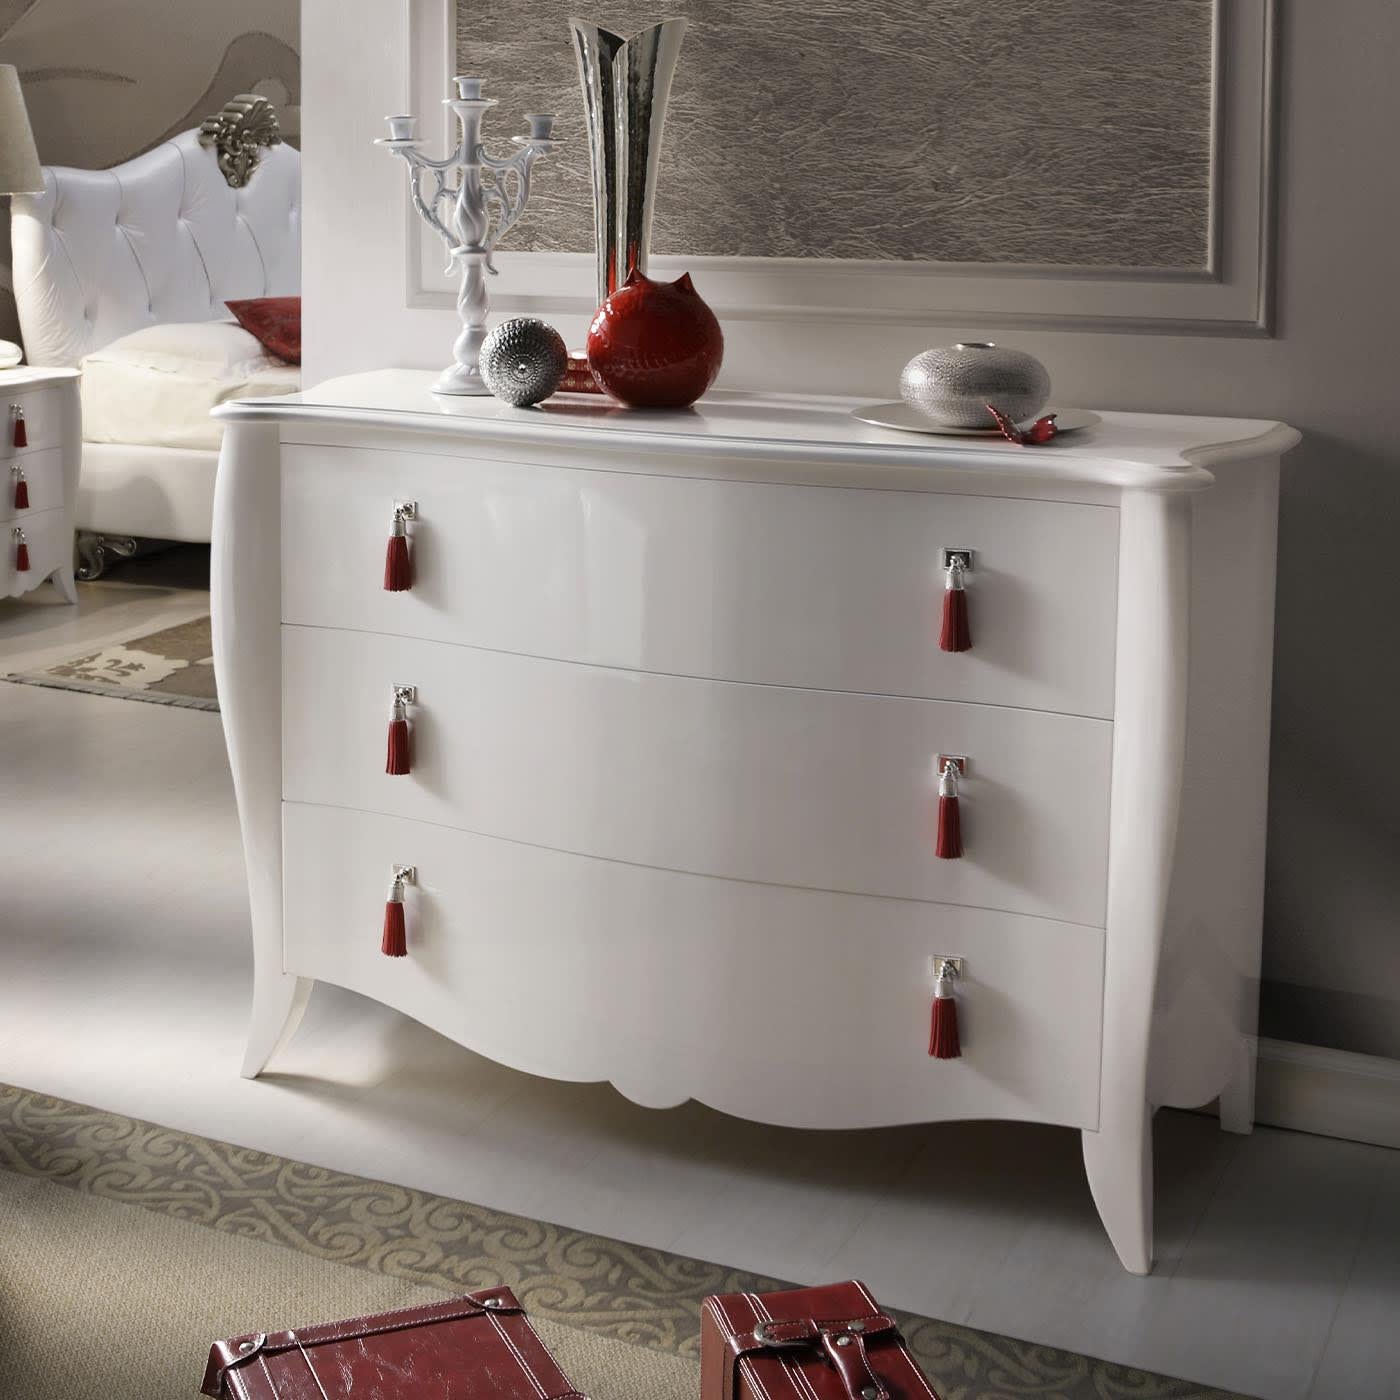 Discover this white dresser in lacquered wood with three drawers by Ros Italia Interiors. The handles are in leather and metal with a silver finishing. Please, contact the Concierge service for further information.